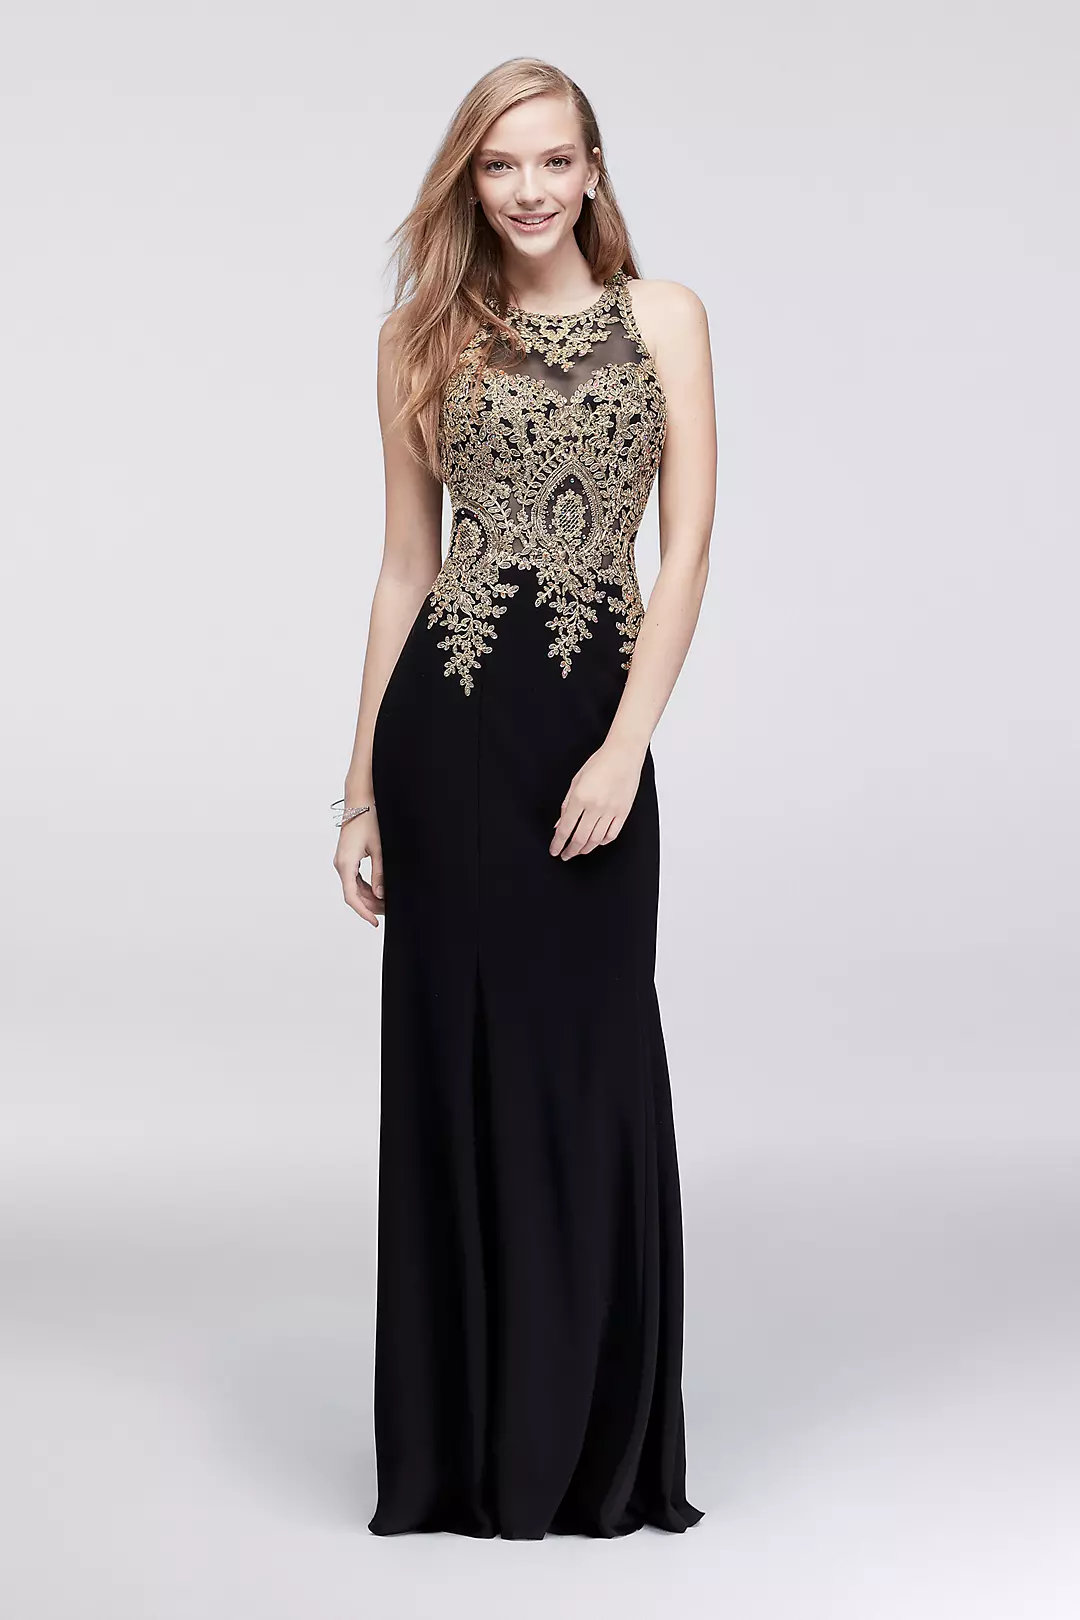 Gold-Embroidered Illusion Column Dress Image